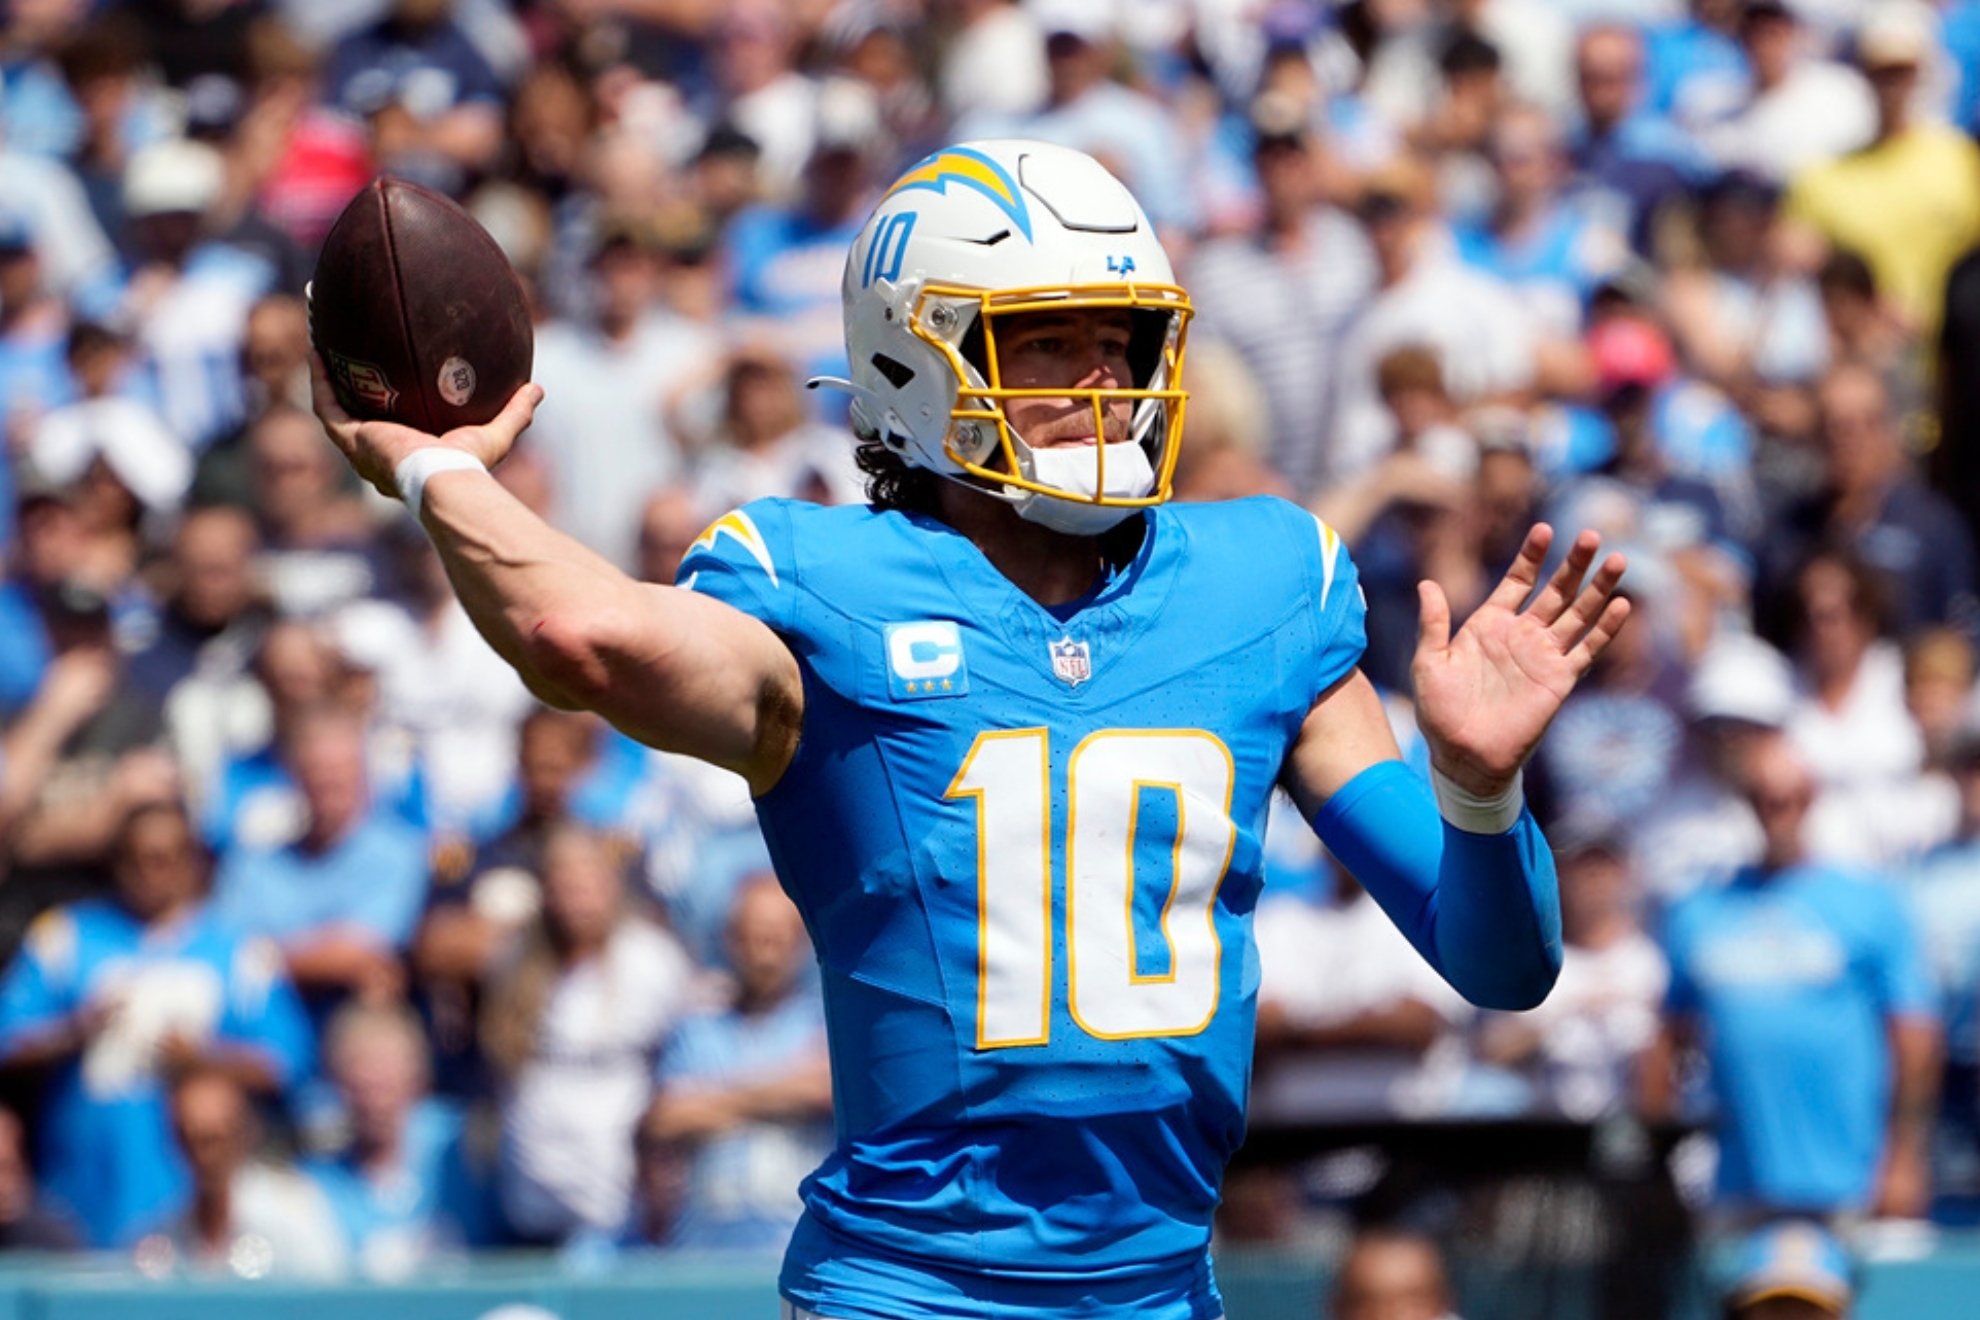 Herbert and the Chargers are 0-2 to start the season